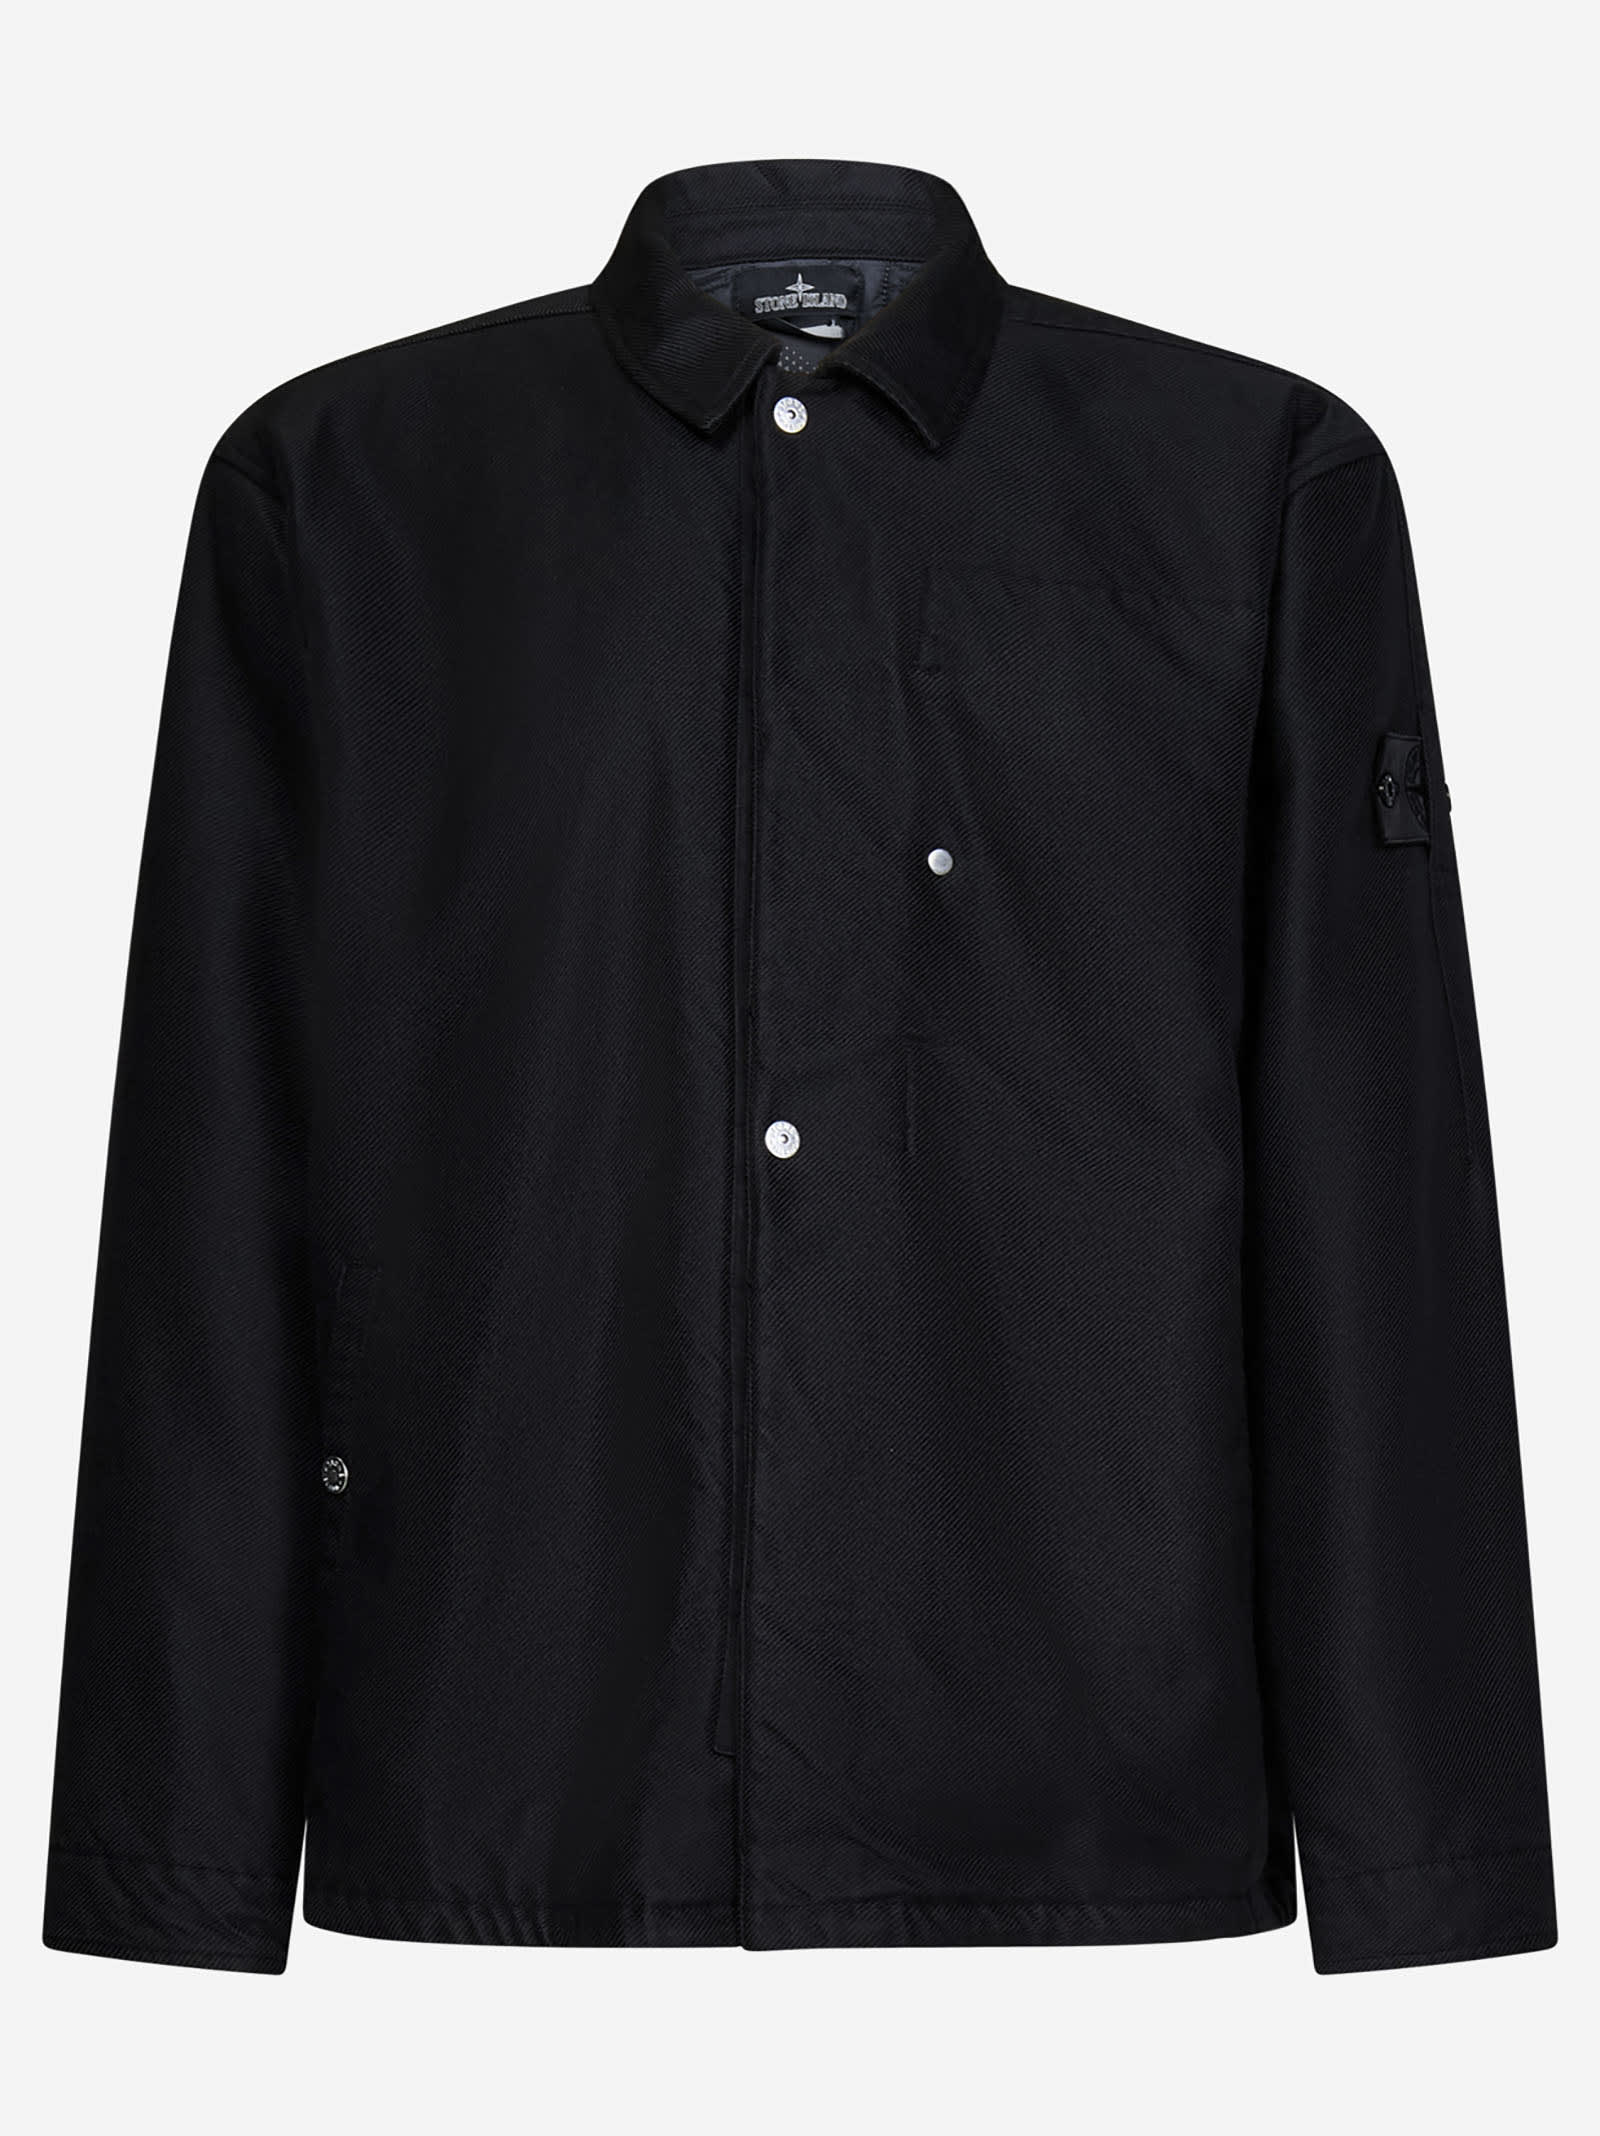 Stone Island Shadow Project 10515 Insulated Coach Jacket chapter 1 Jacket